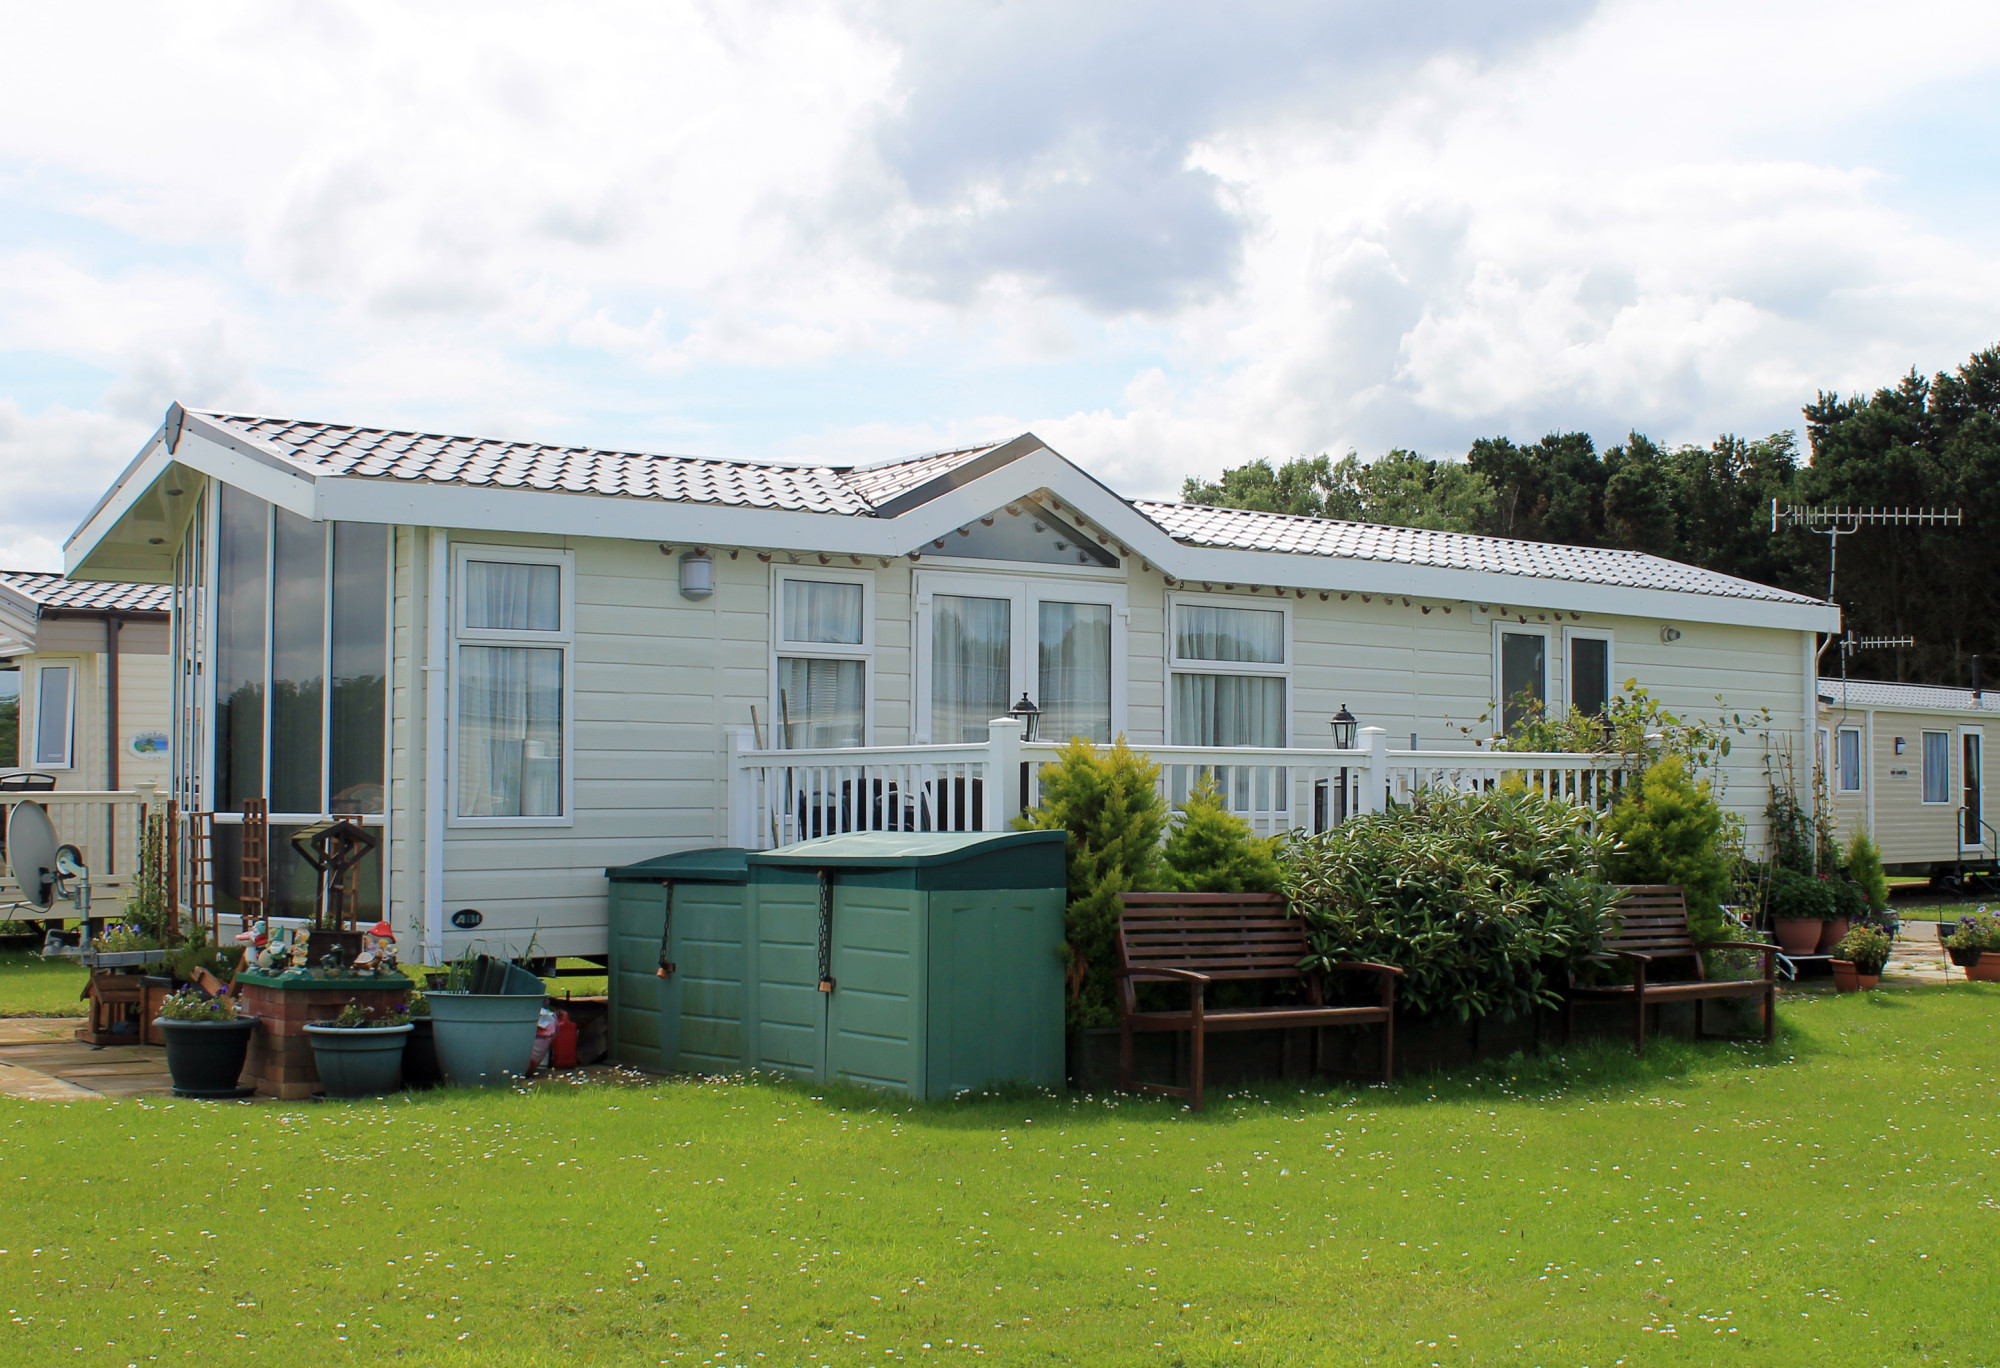 How does insurance for mobile homes work, and what coverage do you need? Read this guide to learn about average rates and how to select a policy.